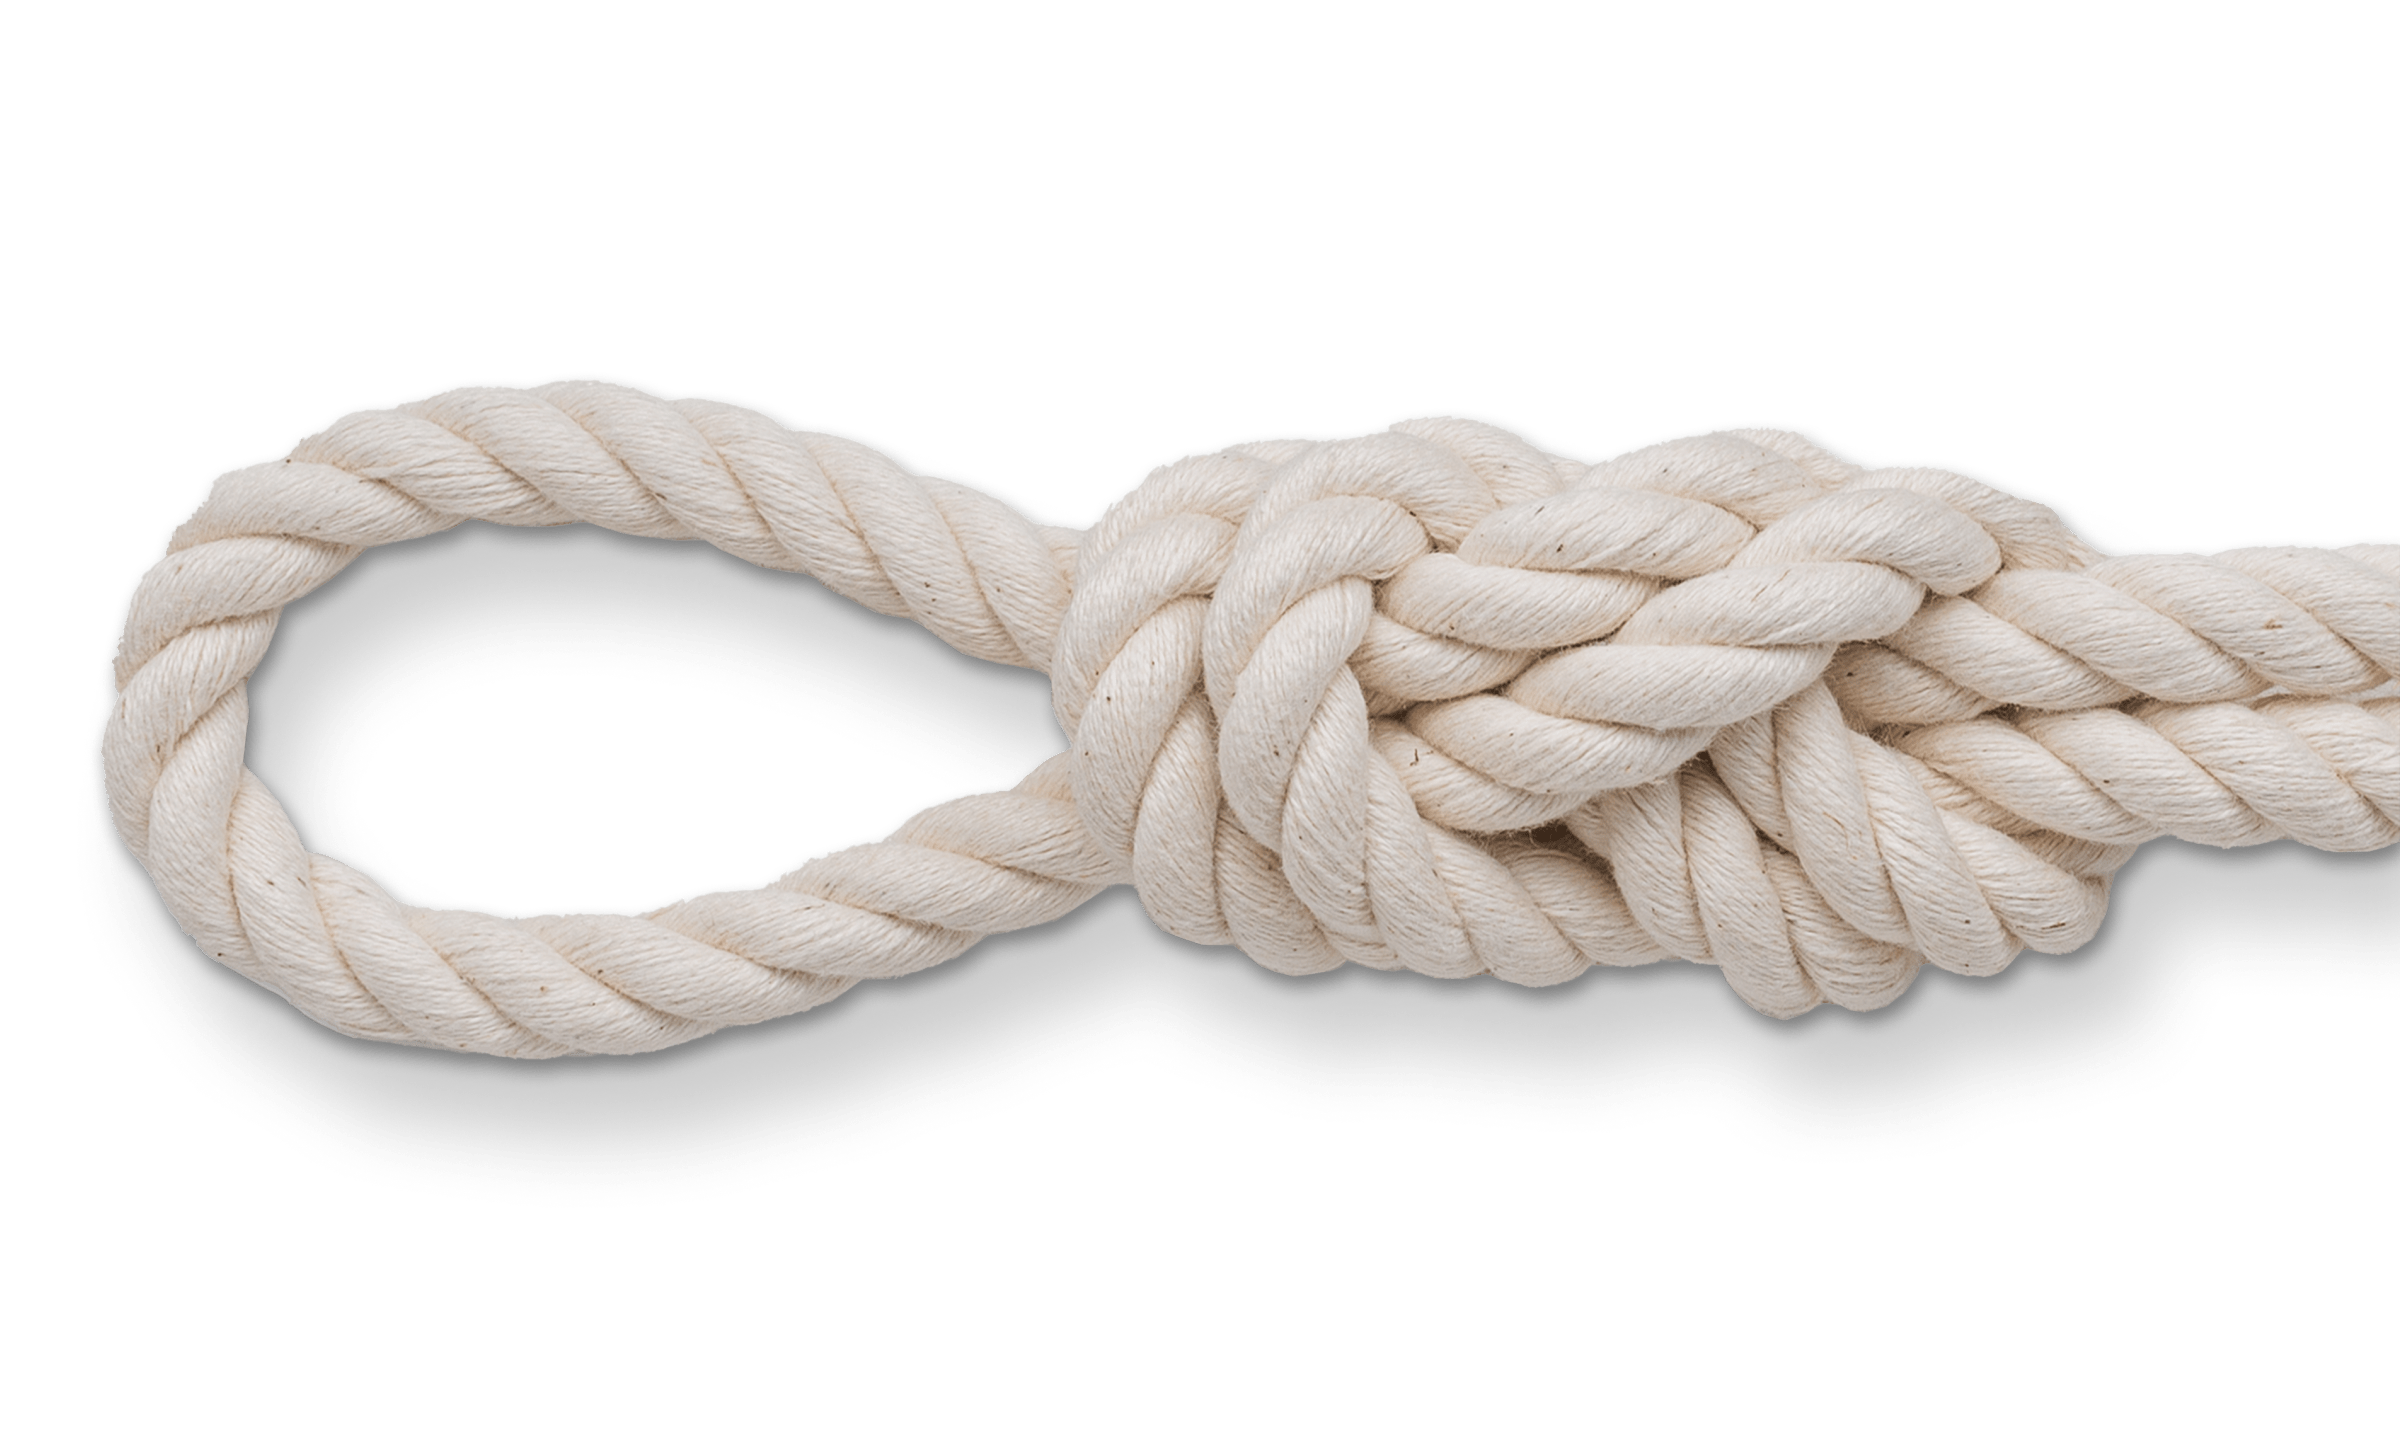 Natural Cotton Rope Cord Twine Braided 16 Strand Garden Washing Line  Camping Etc